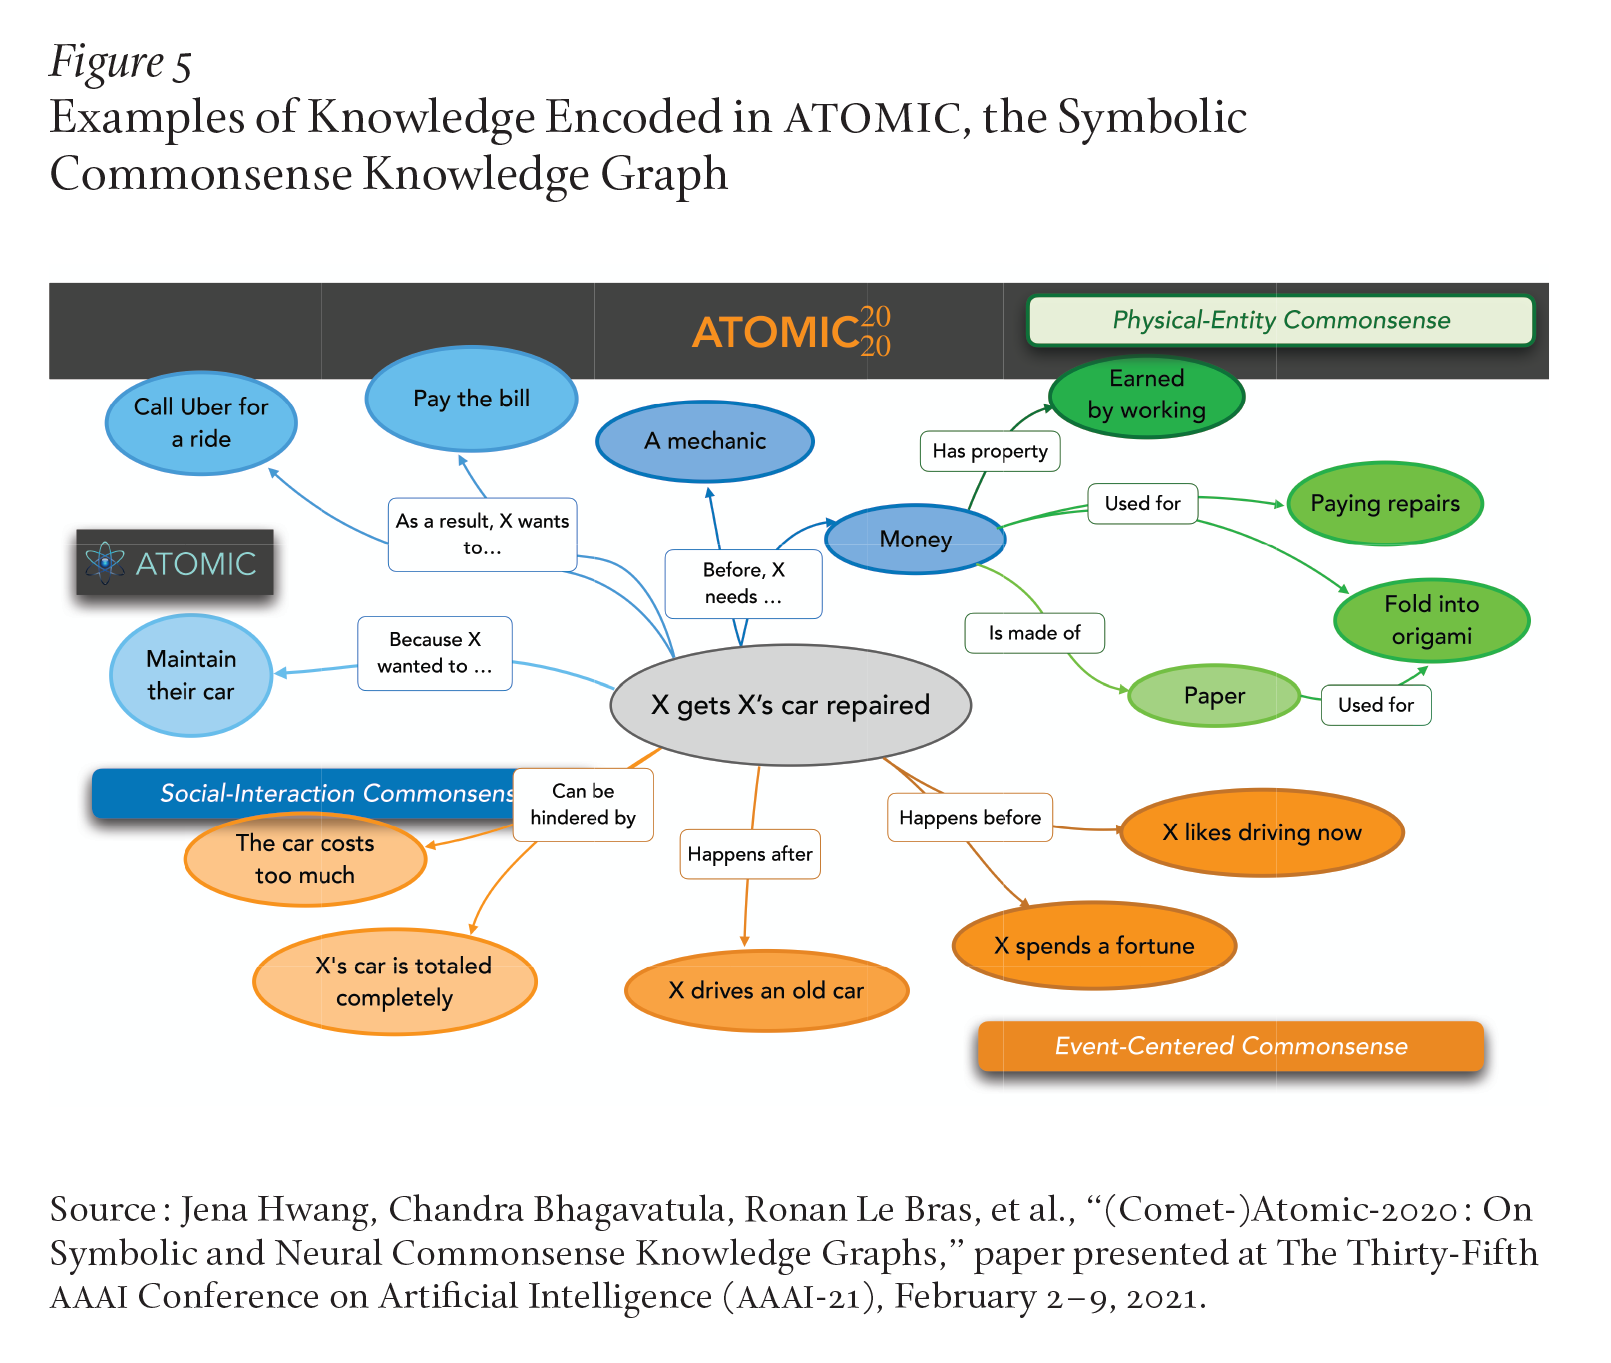 Figure 5: Examples of Knowledge Encoded in ATOMIC, the Symbolic Commonsense Knowledge Graph